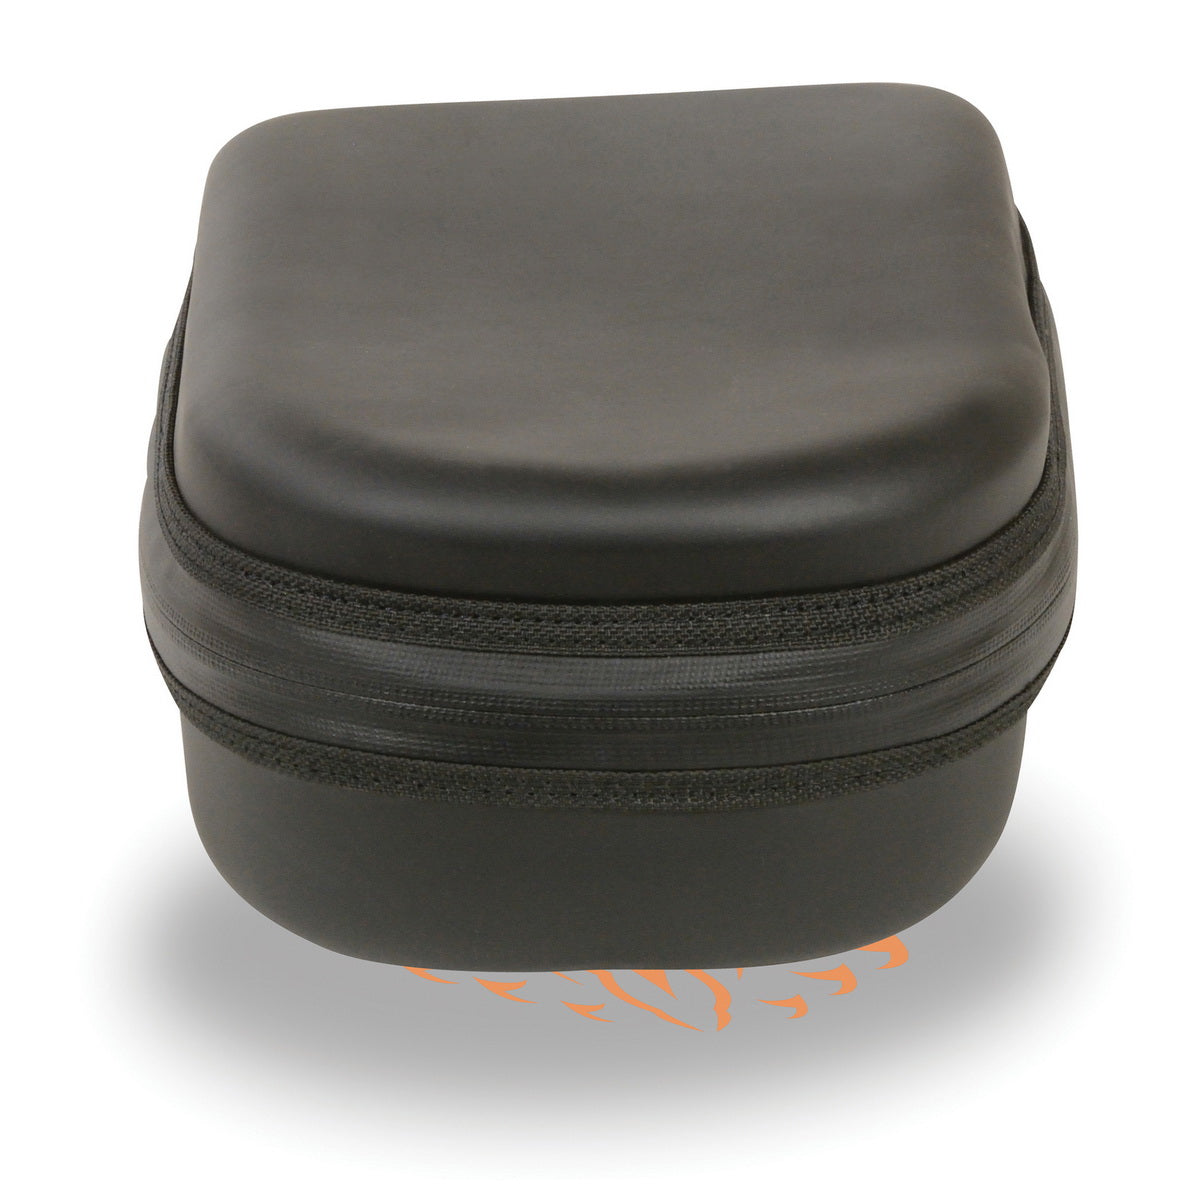 Milwaukee Leather MP8900 Black Small Waterproof Suction Cup Storage Pouch